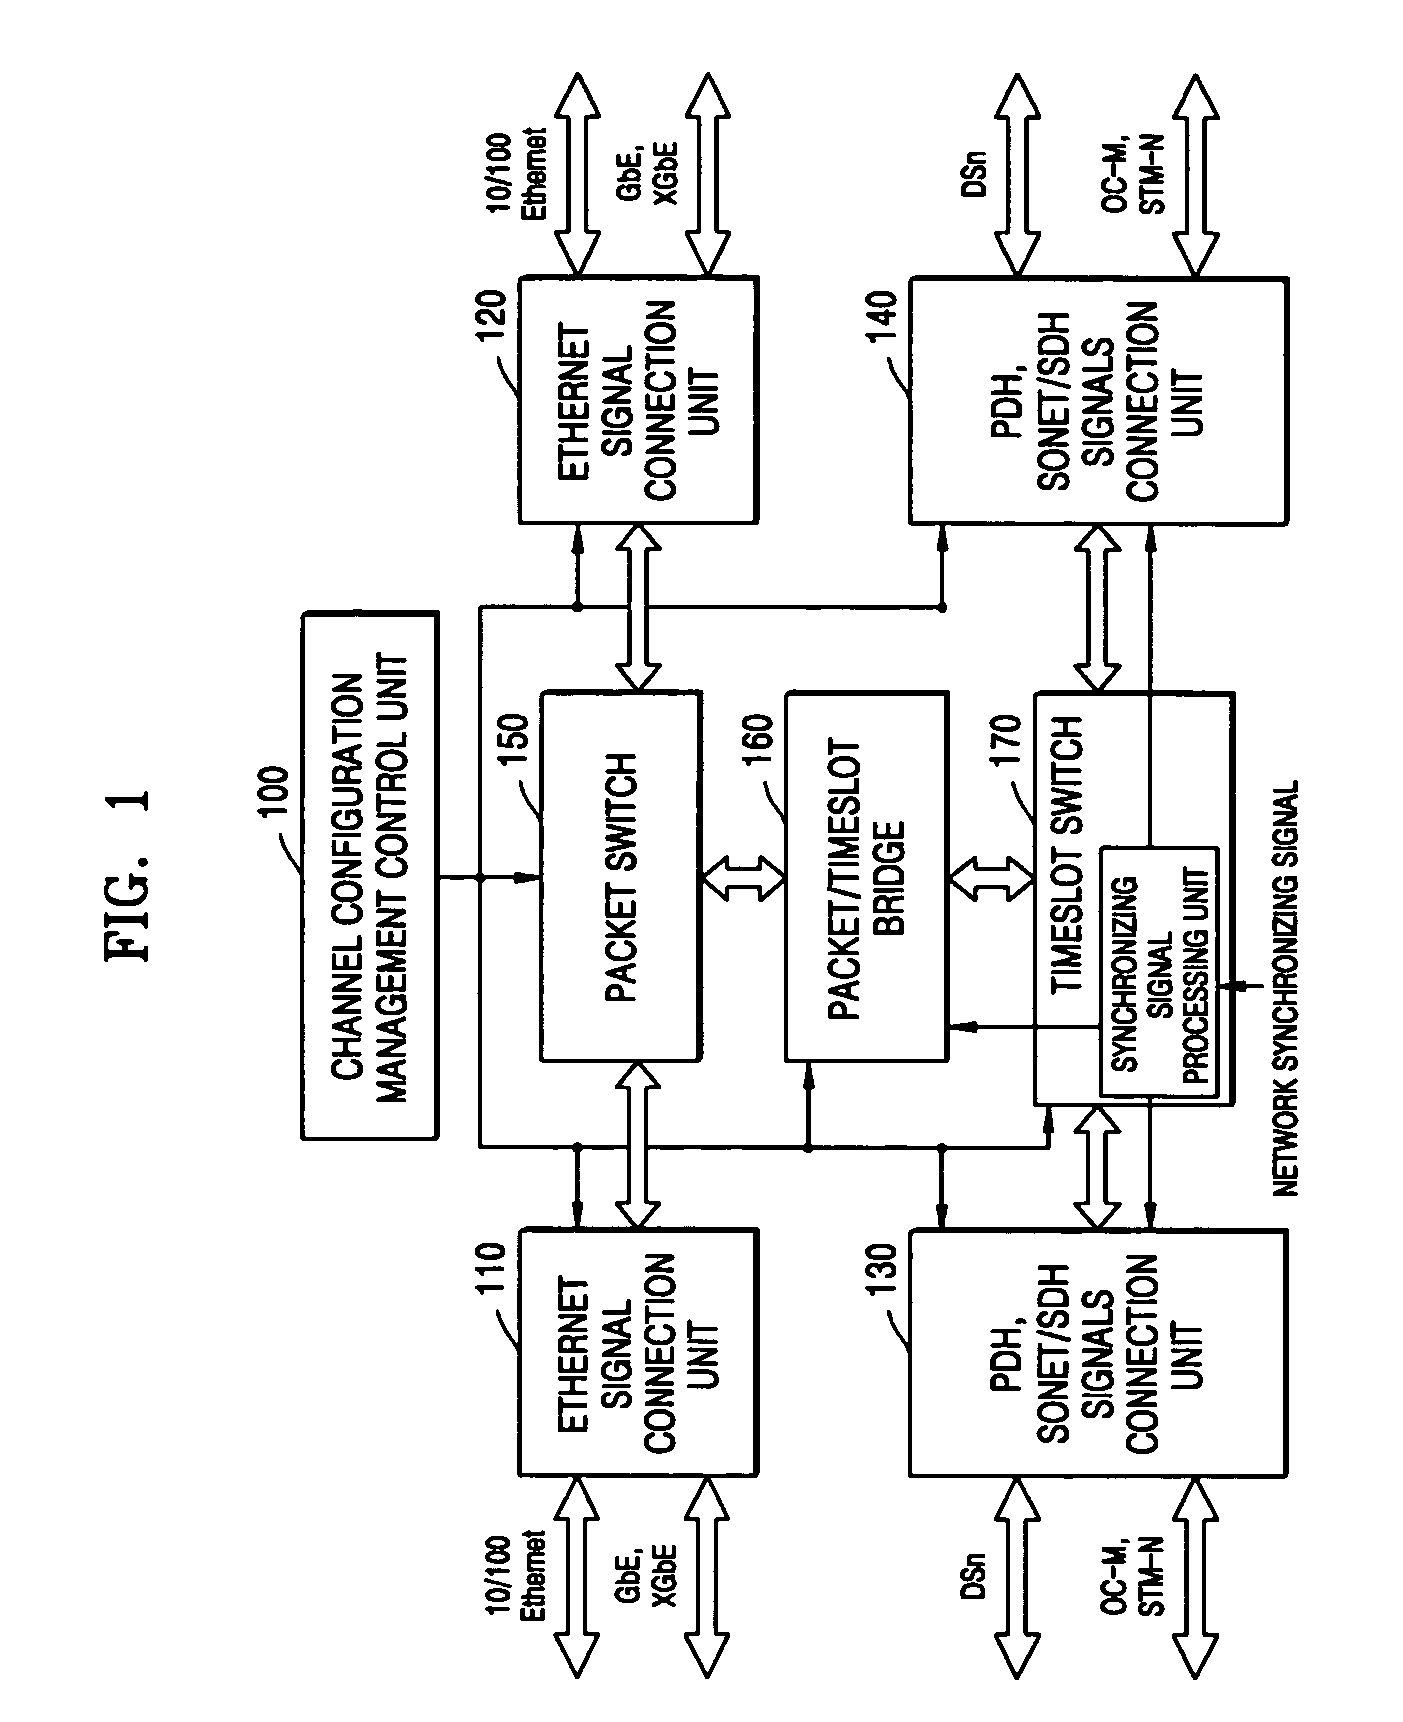 Apparatus for and method of integrating switching and transferring of SONET/SDH, PDH, and Ethernet signals